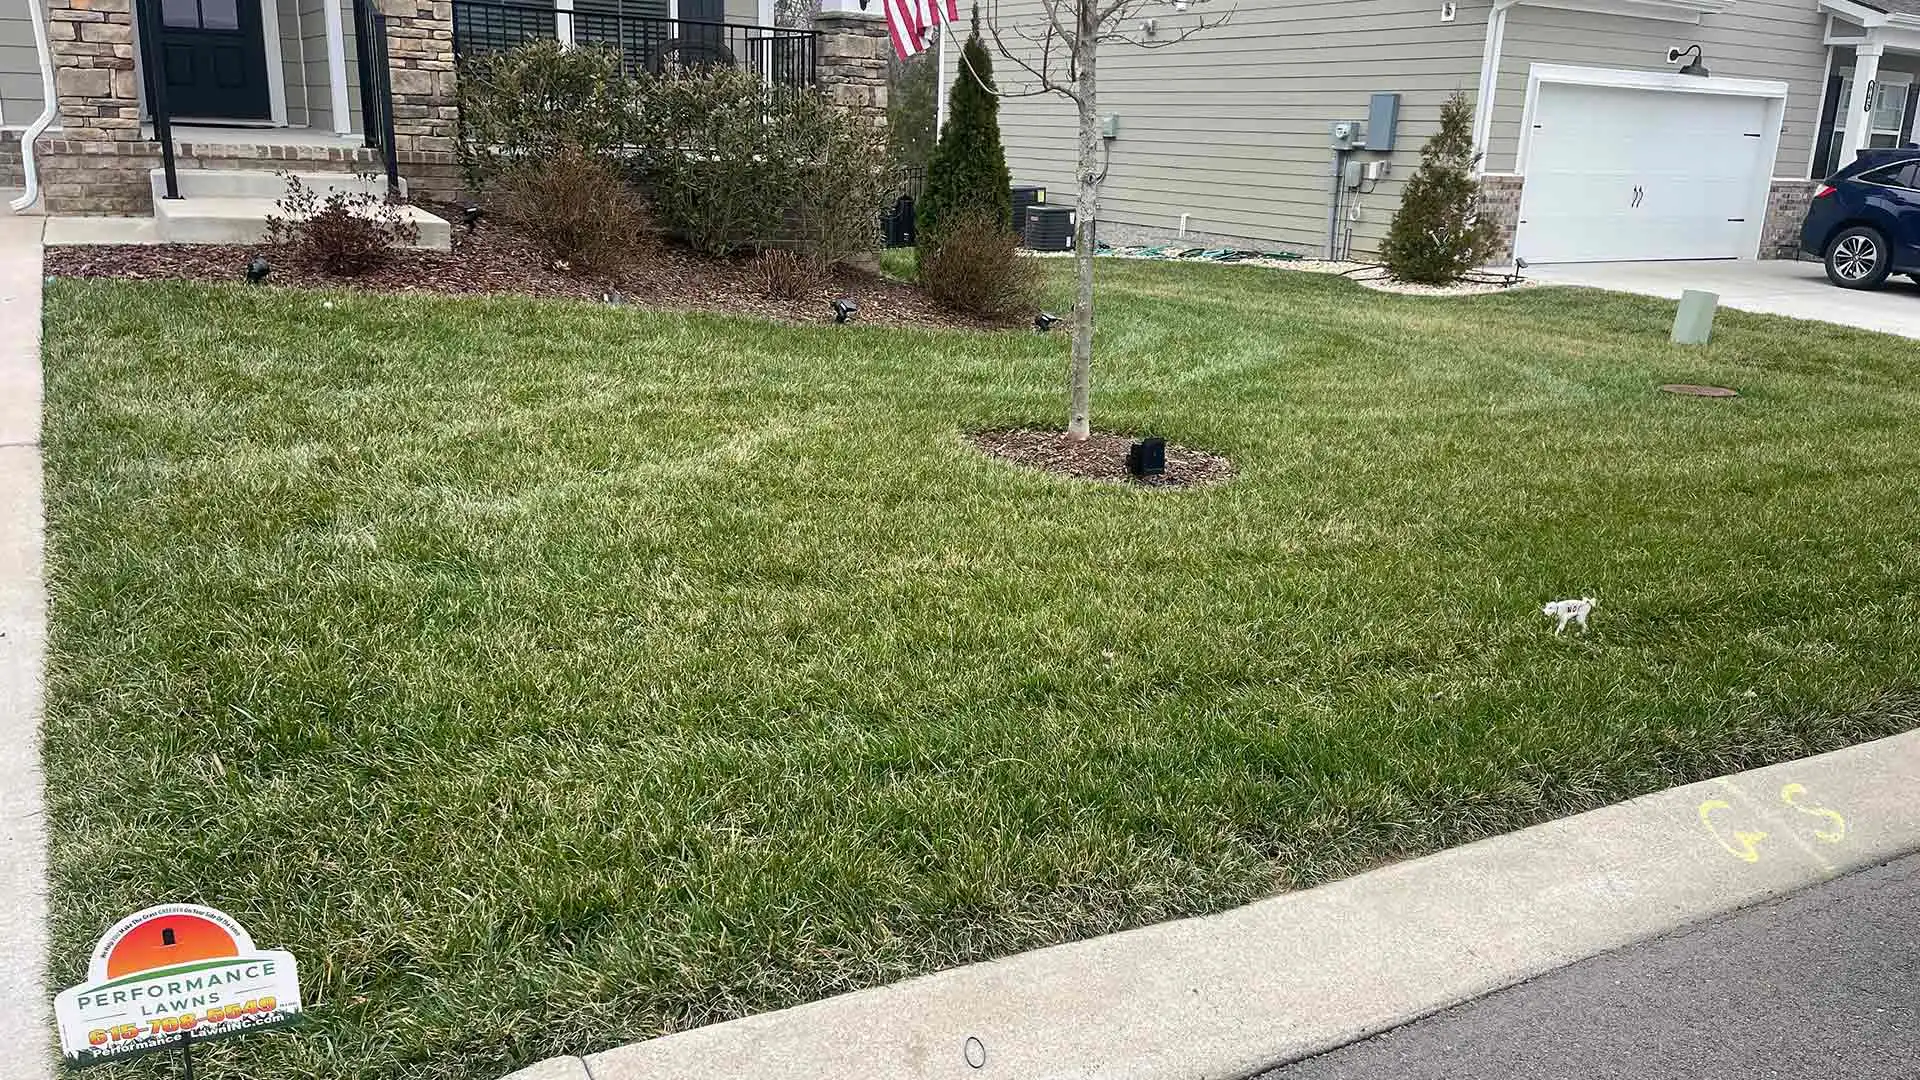 Small serviced lawn in Brentwood, TN.